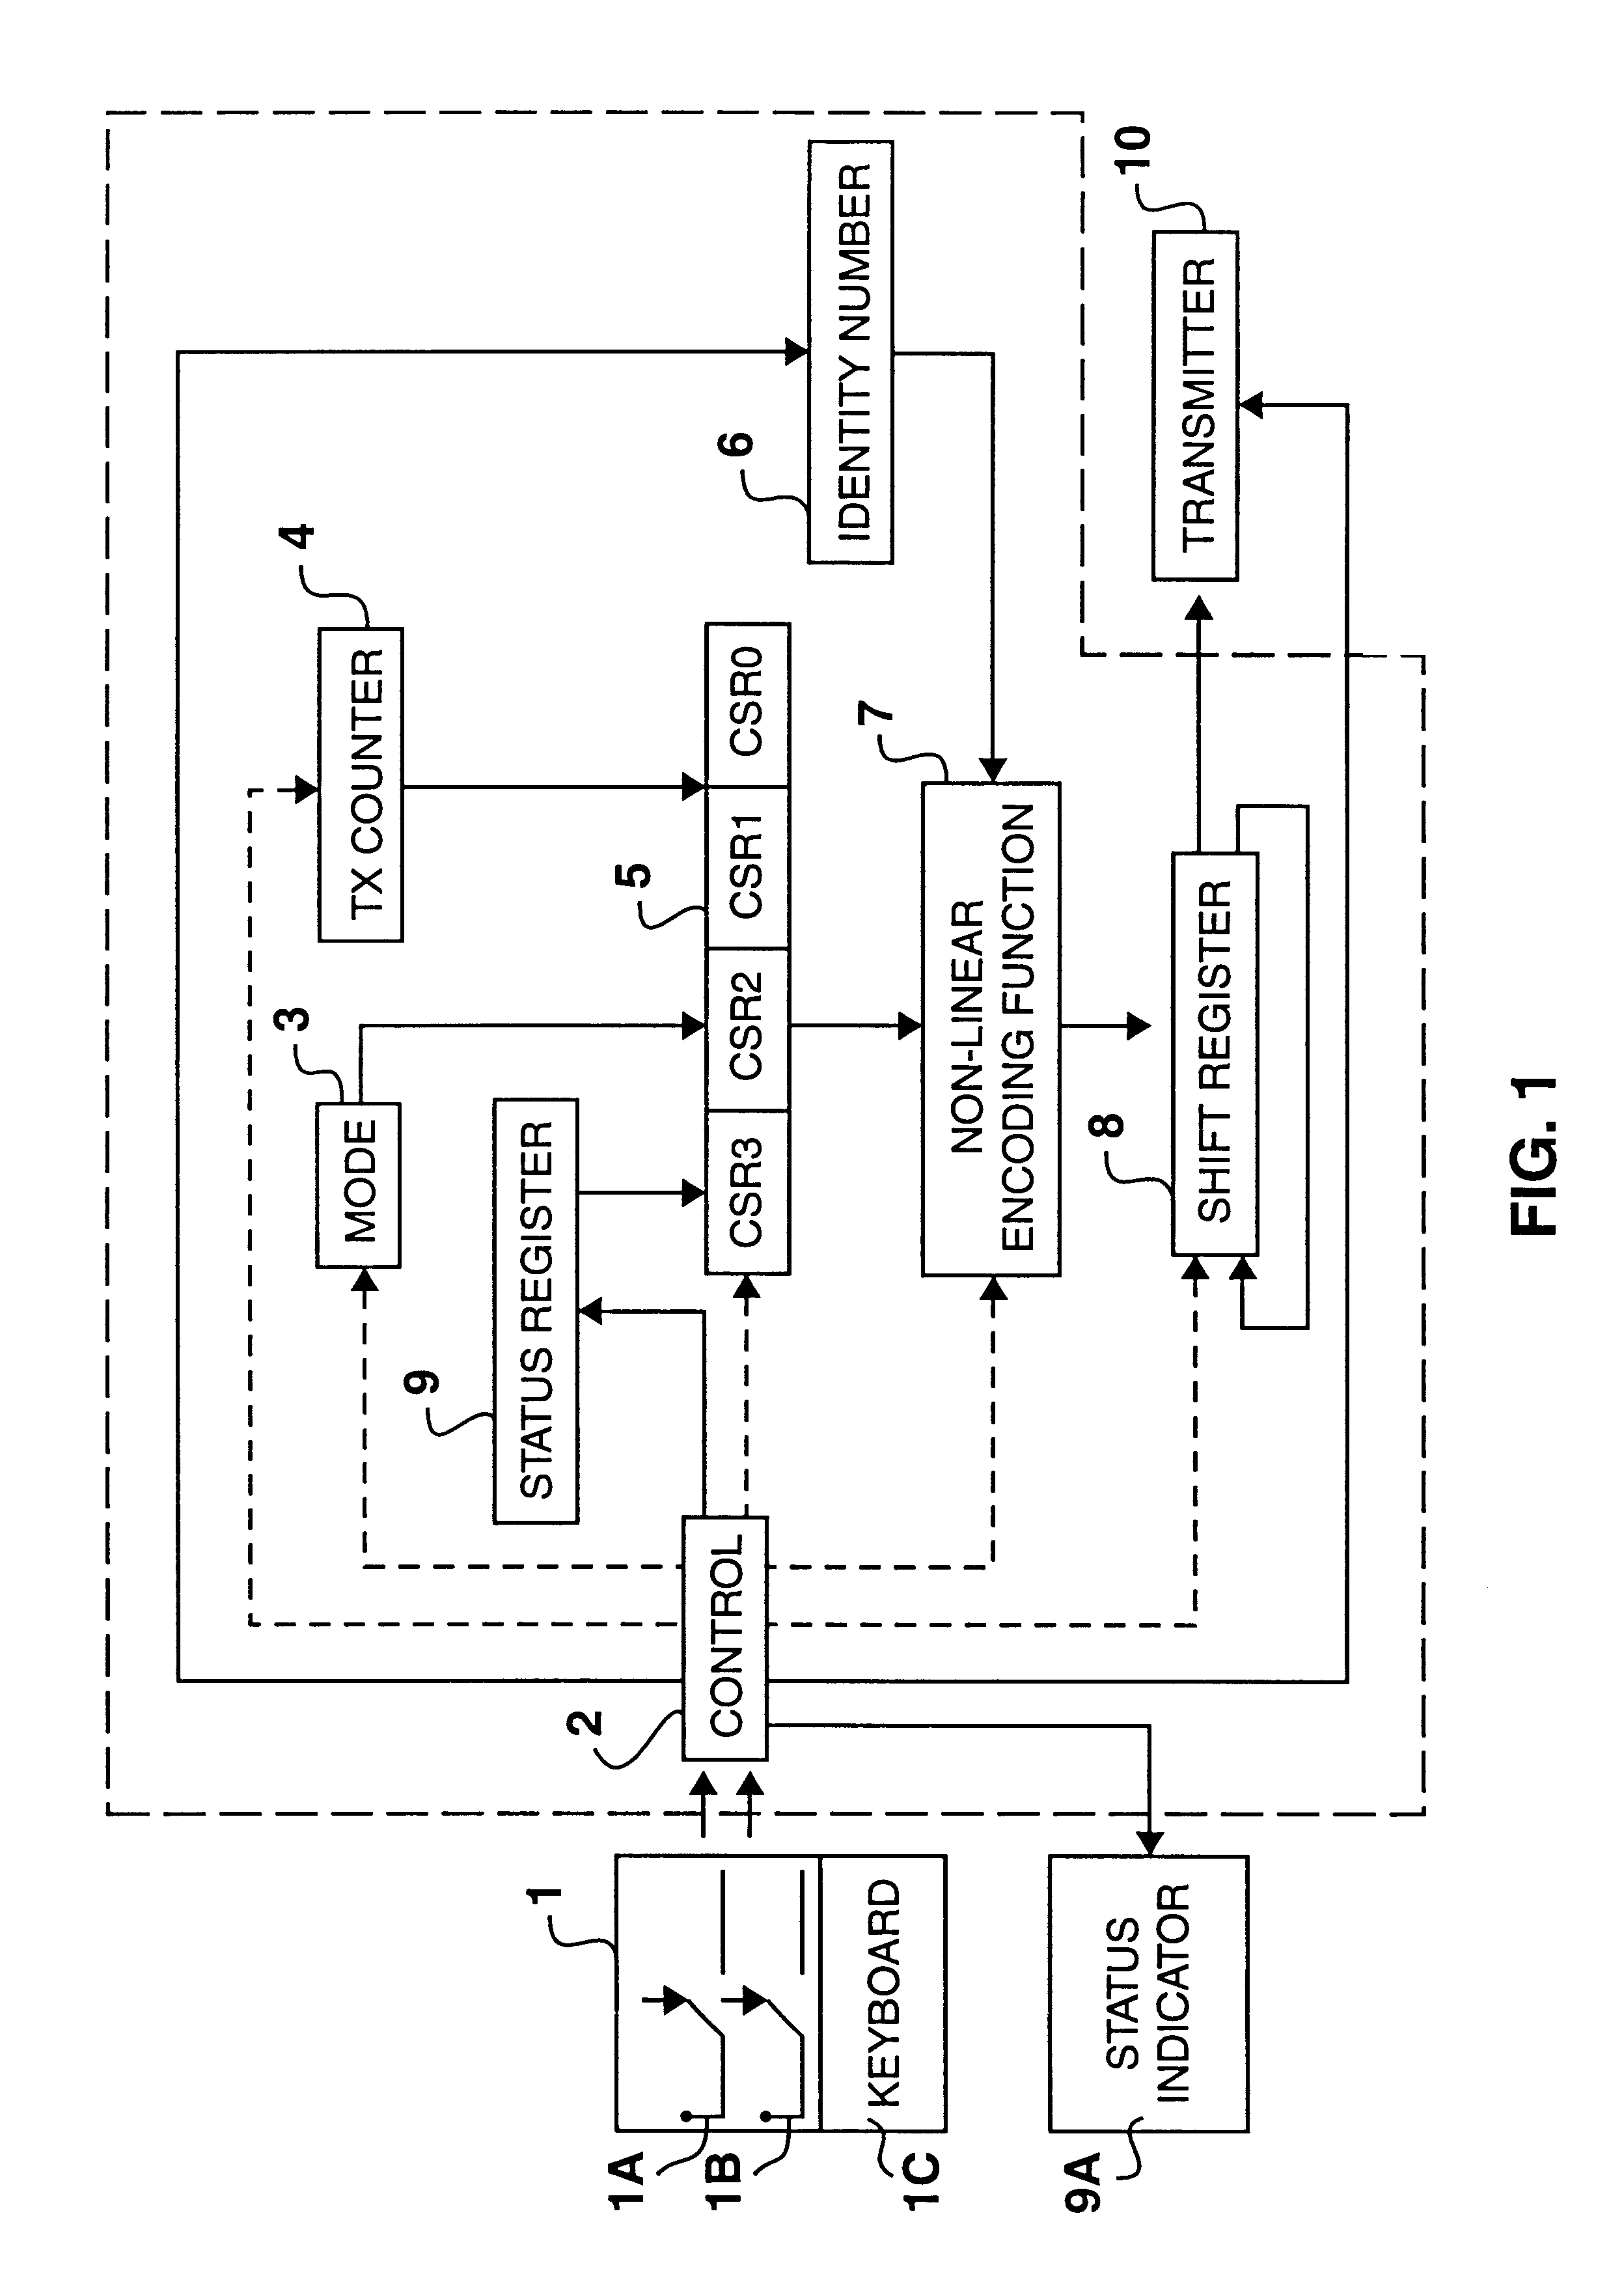 Encoder and decoder microchips and remote control devices for secure unidirectional communication